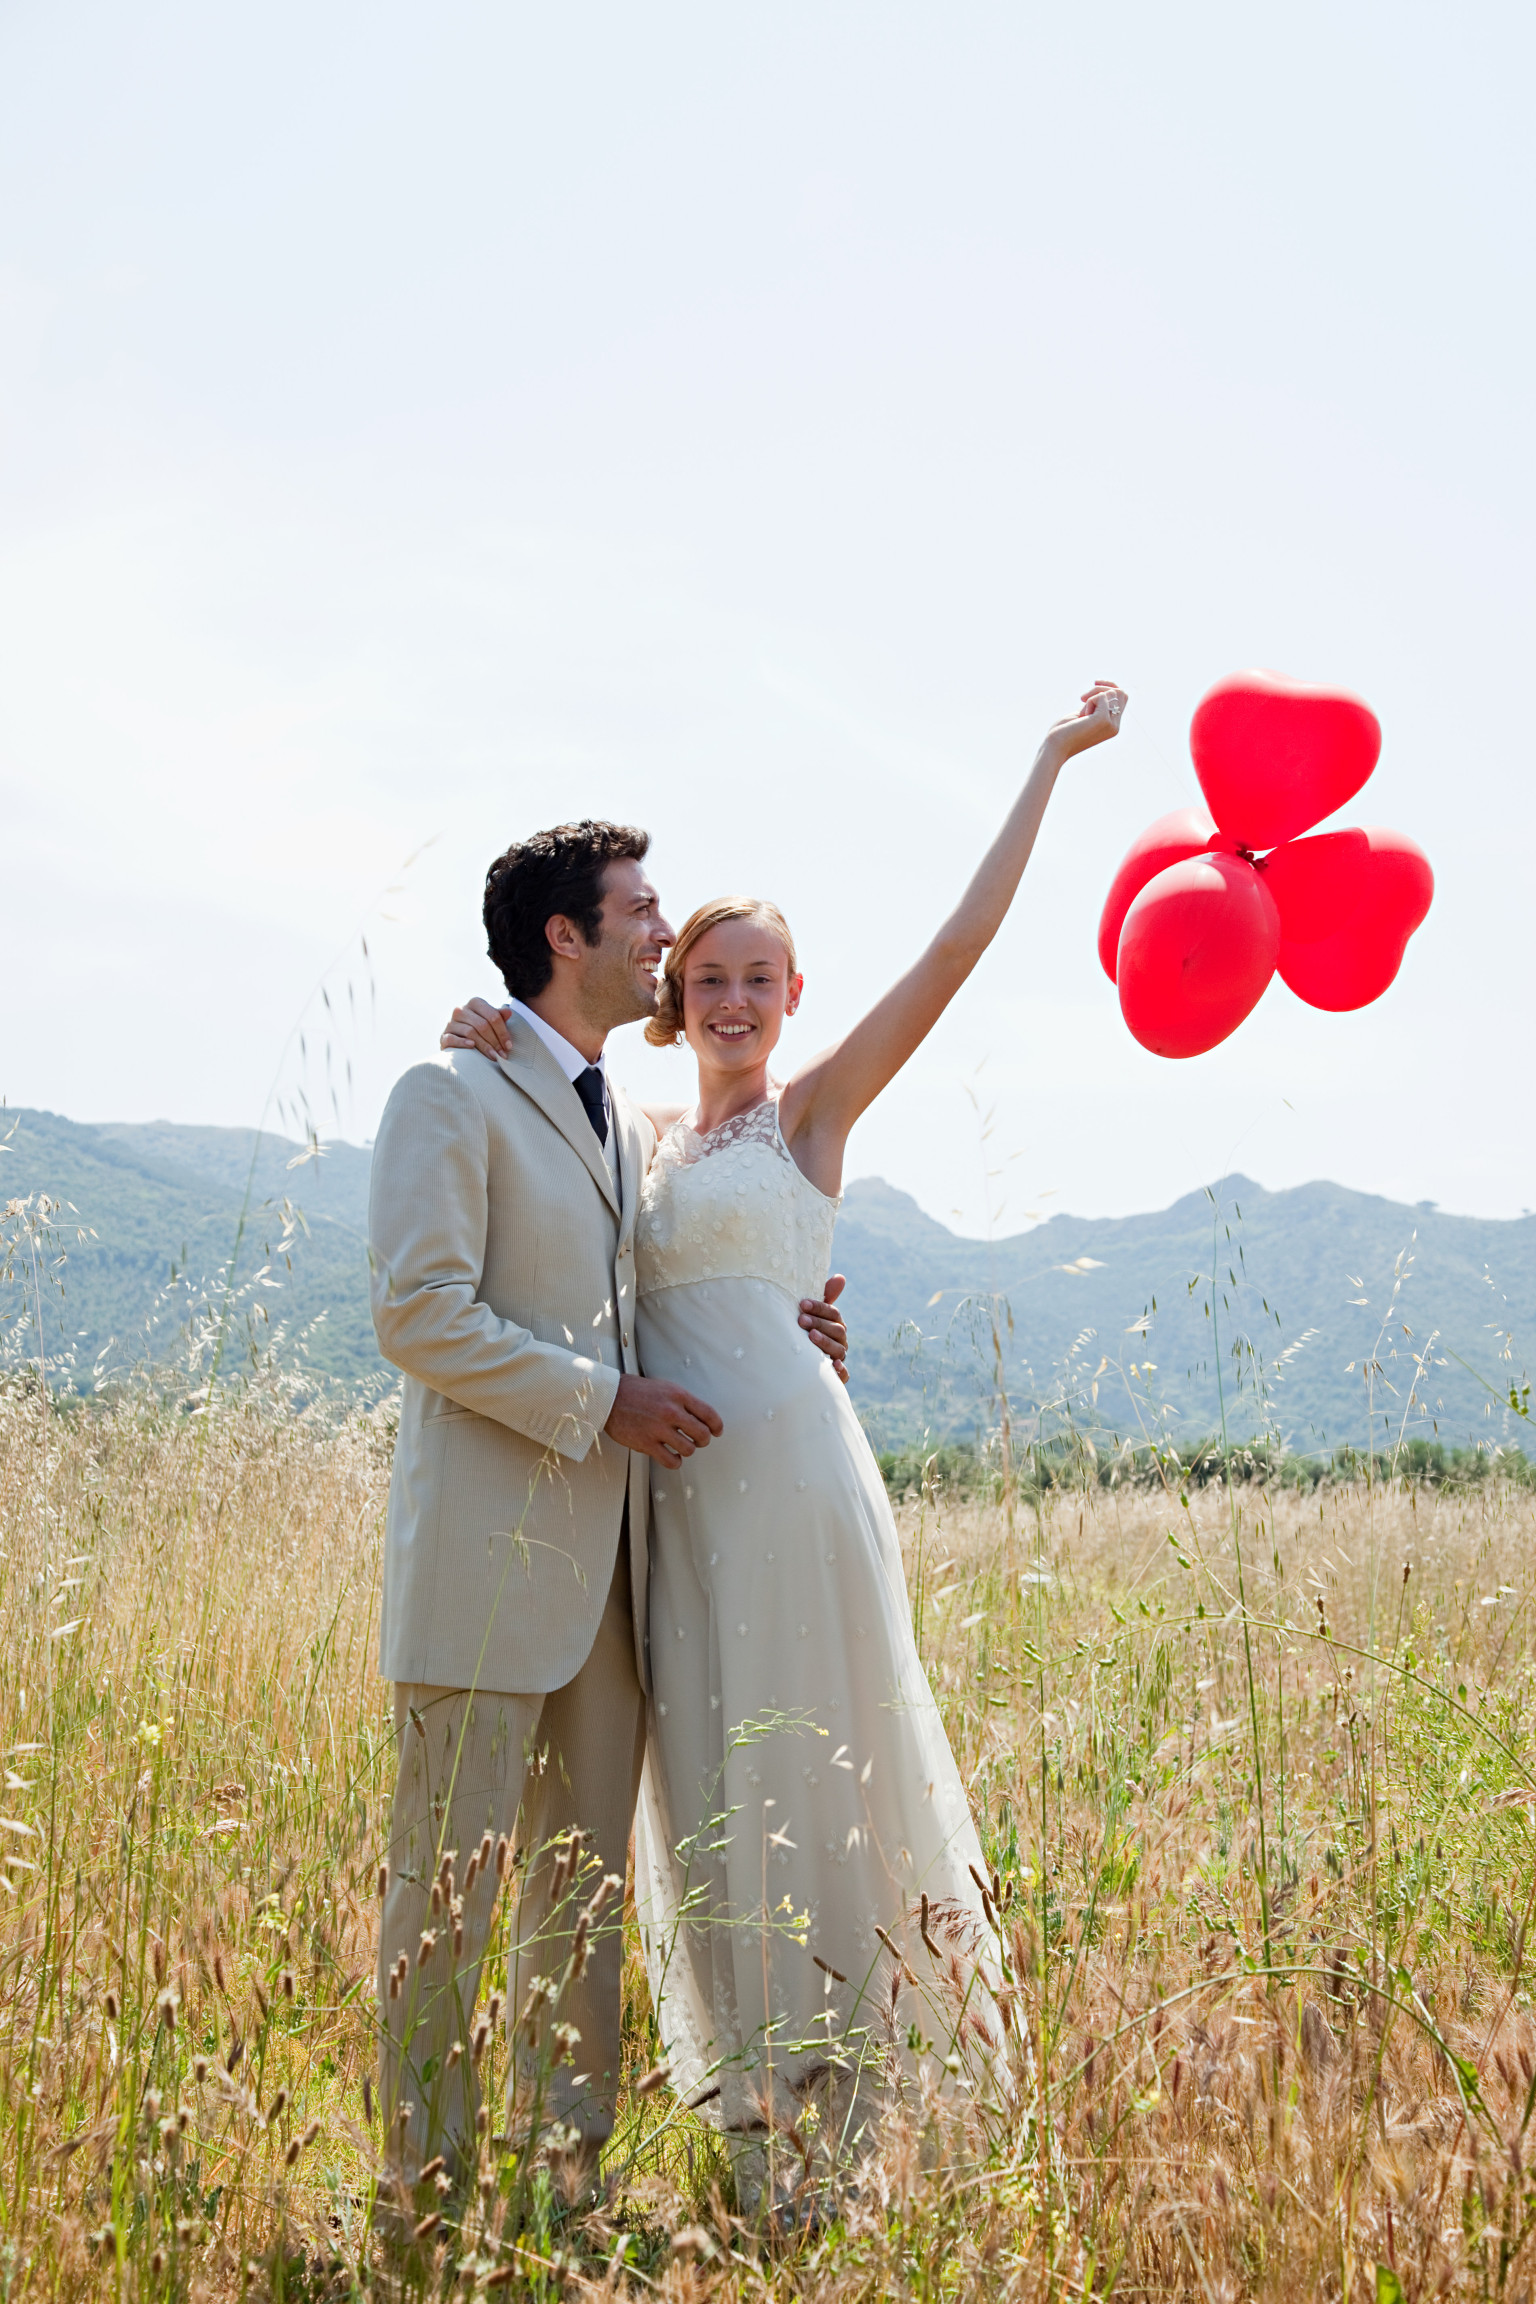 Wedding Ideas Your Guests Will Adore | HuffPost